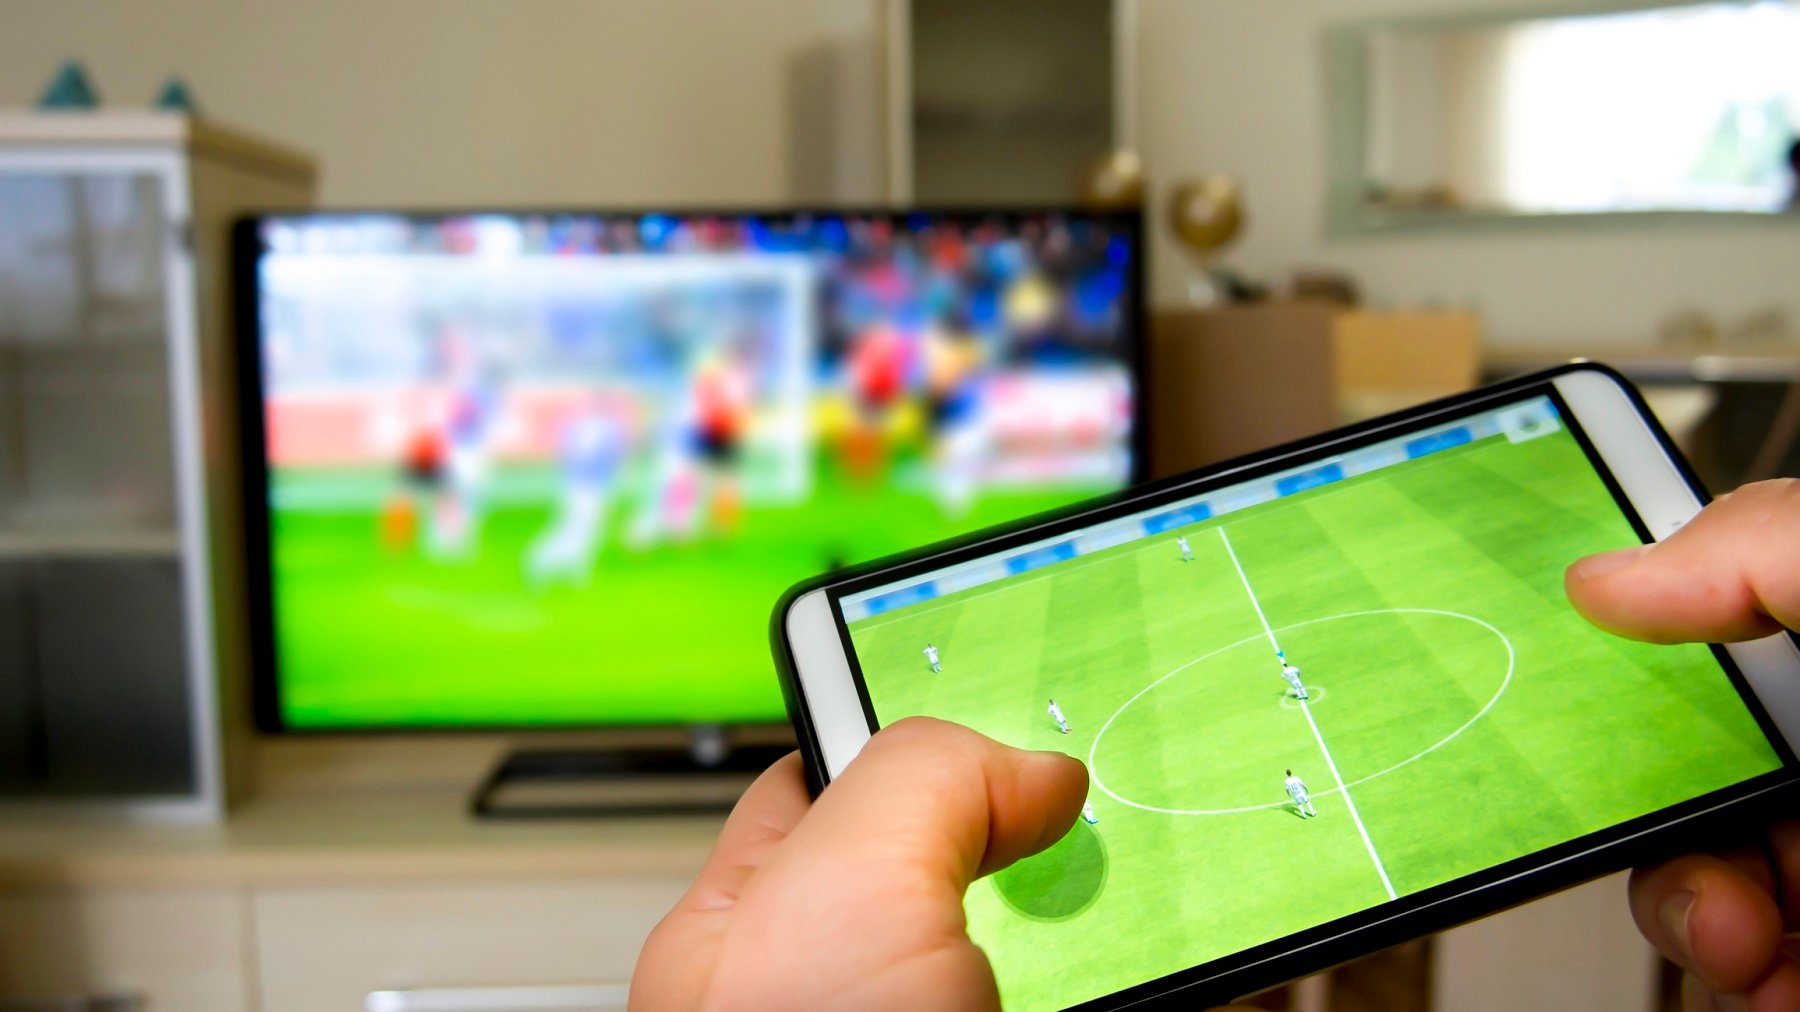 The future of Virtual Advertising with OTT: The personalised advertising board